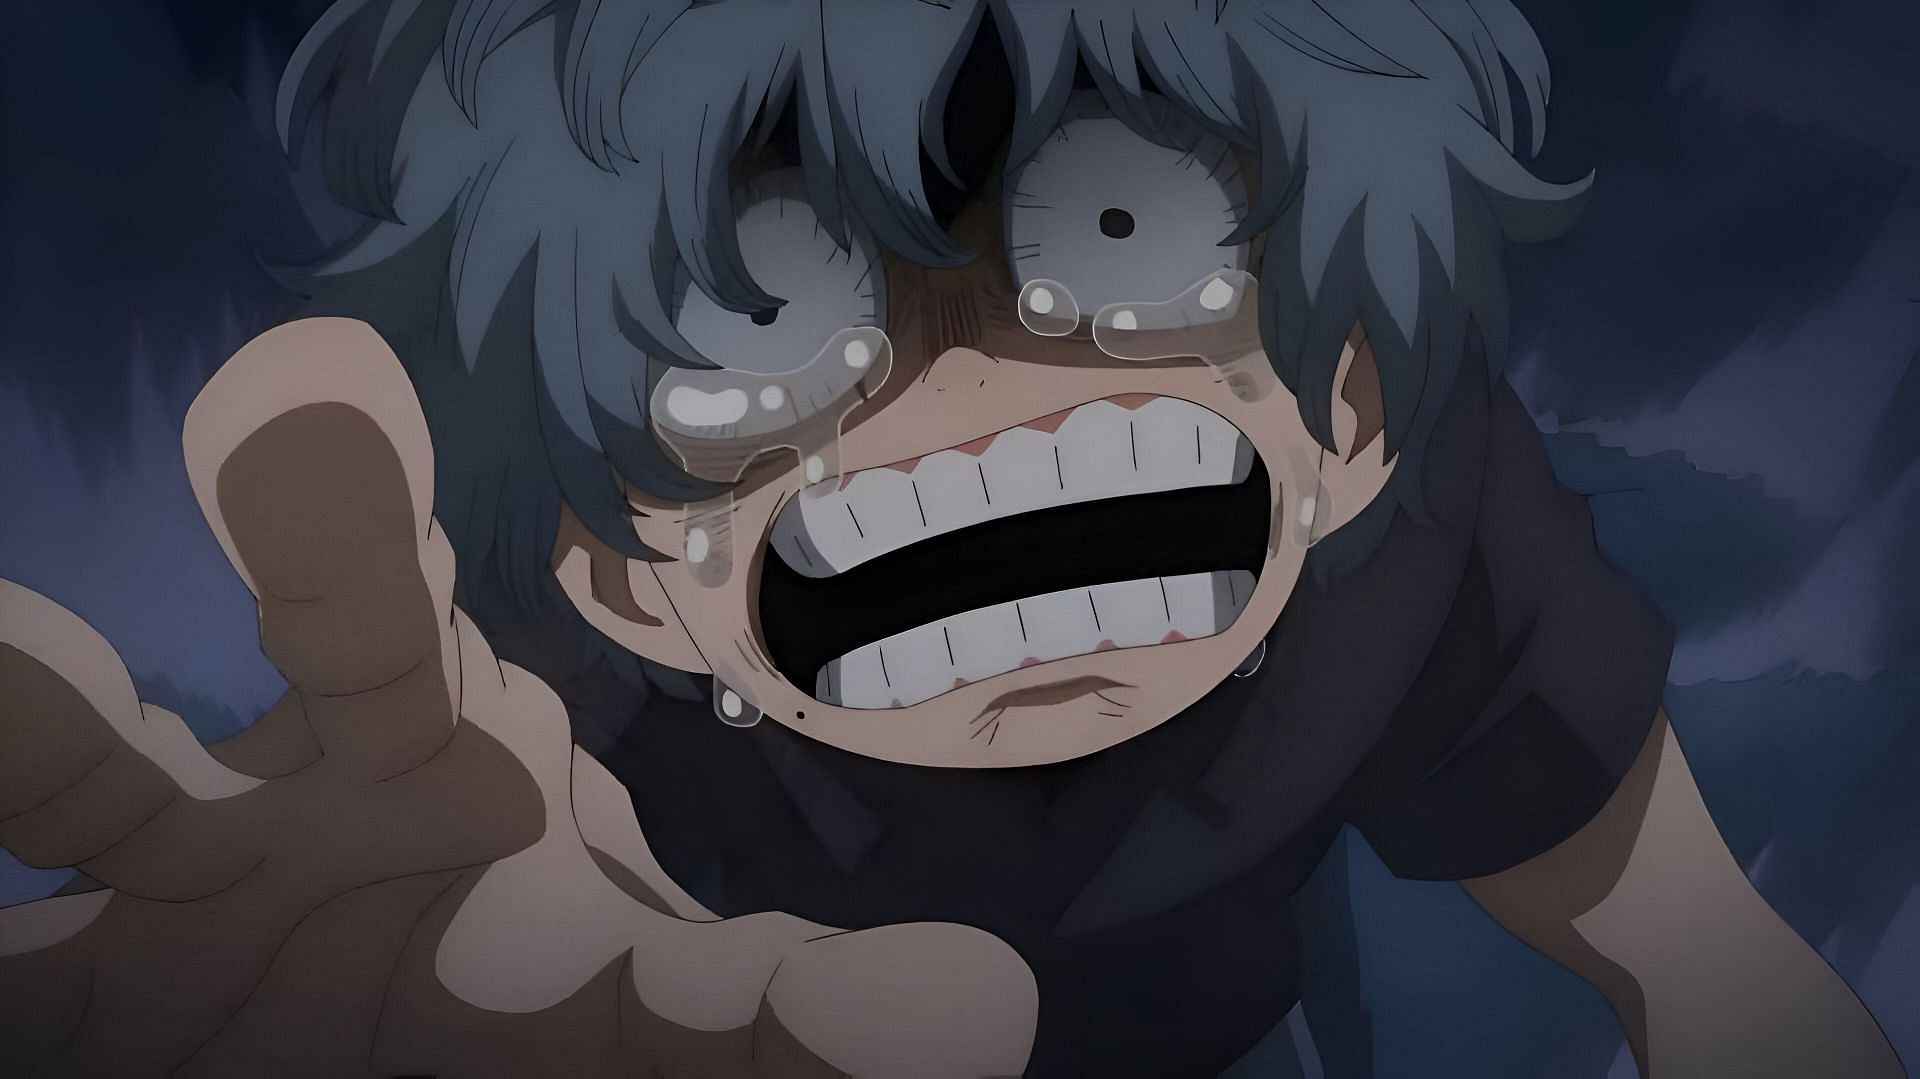 Deku did save Shigaraki in the end, and My Hero Academia fans just don